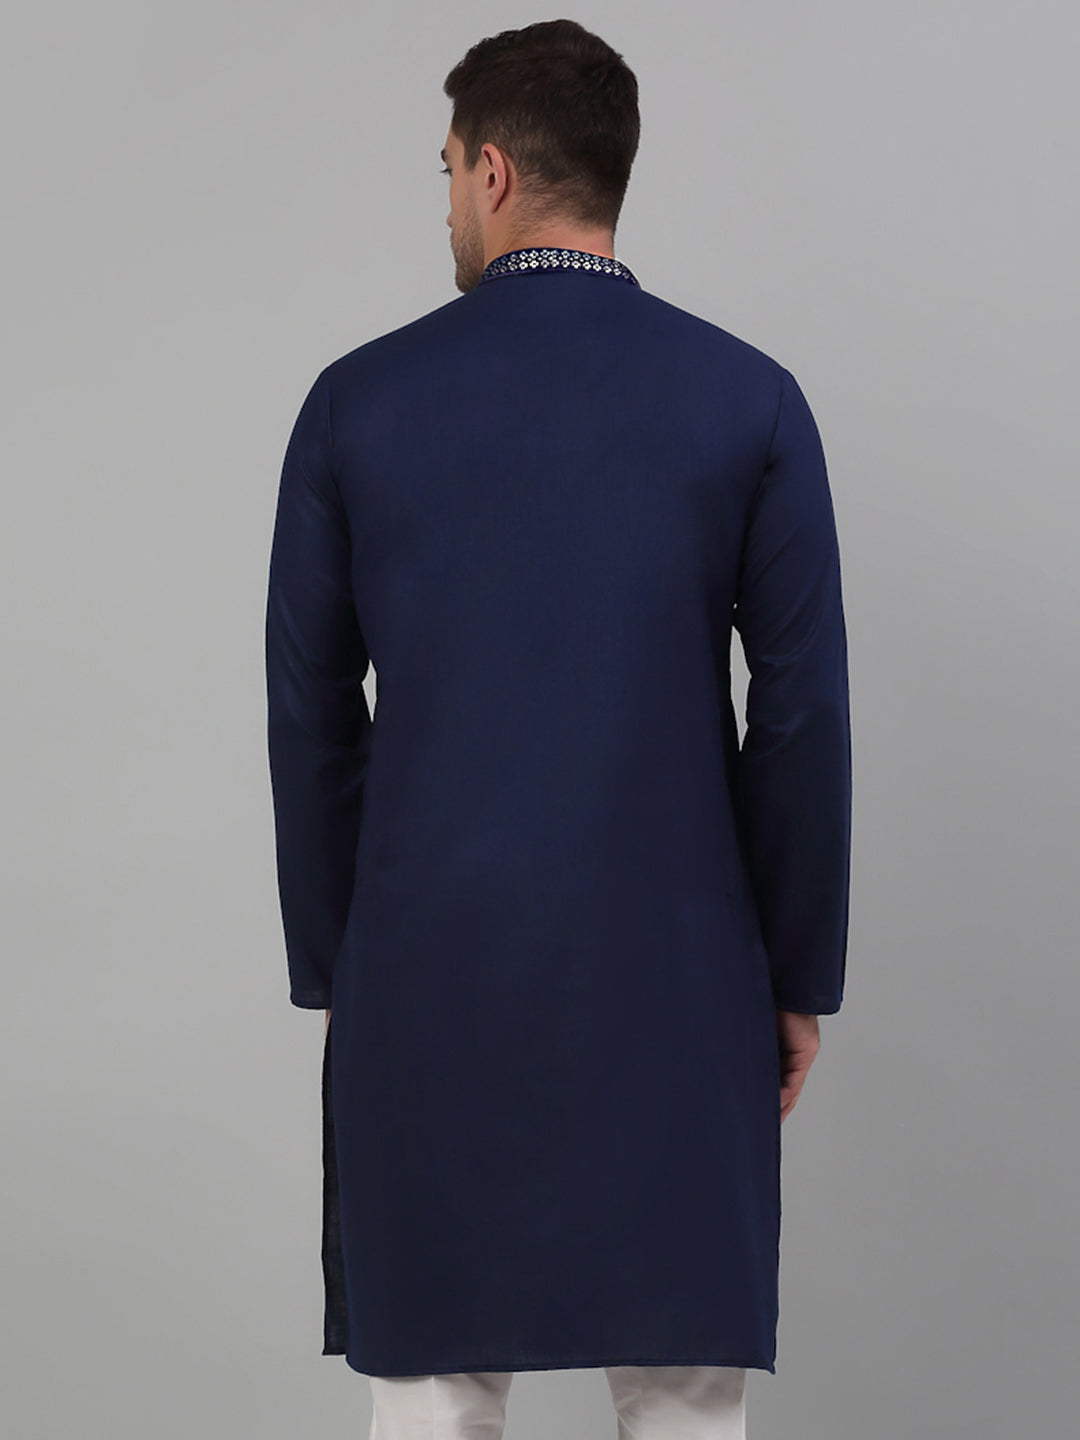 Men's Navy Blue Embroidered Straight Kurta Only